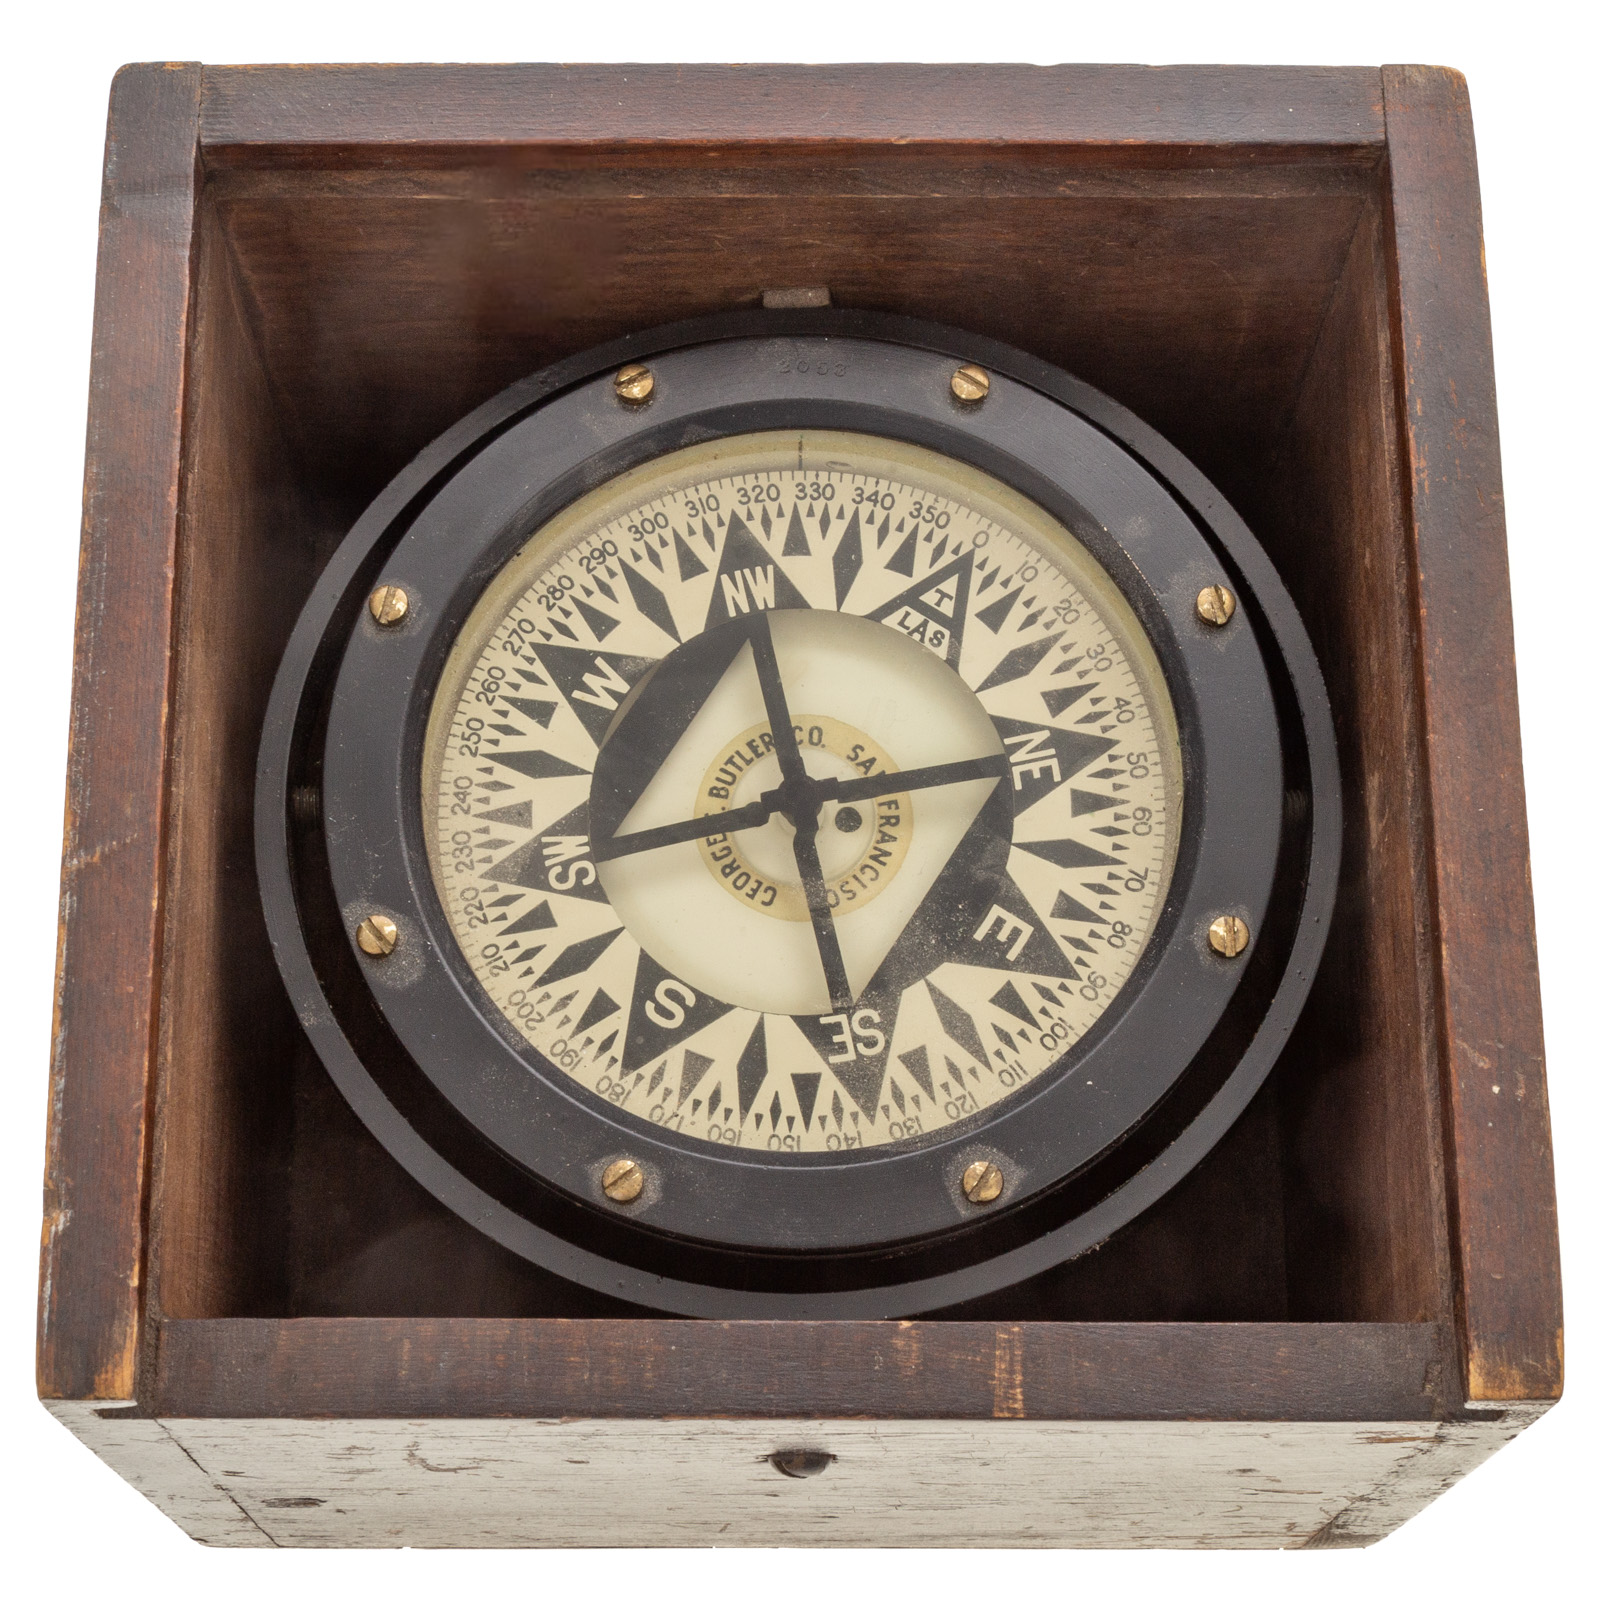 GEORGE BUTLER CO. SHIPS COMPASS